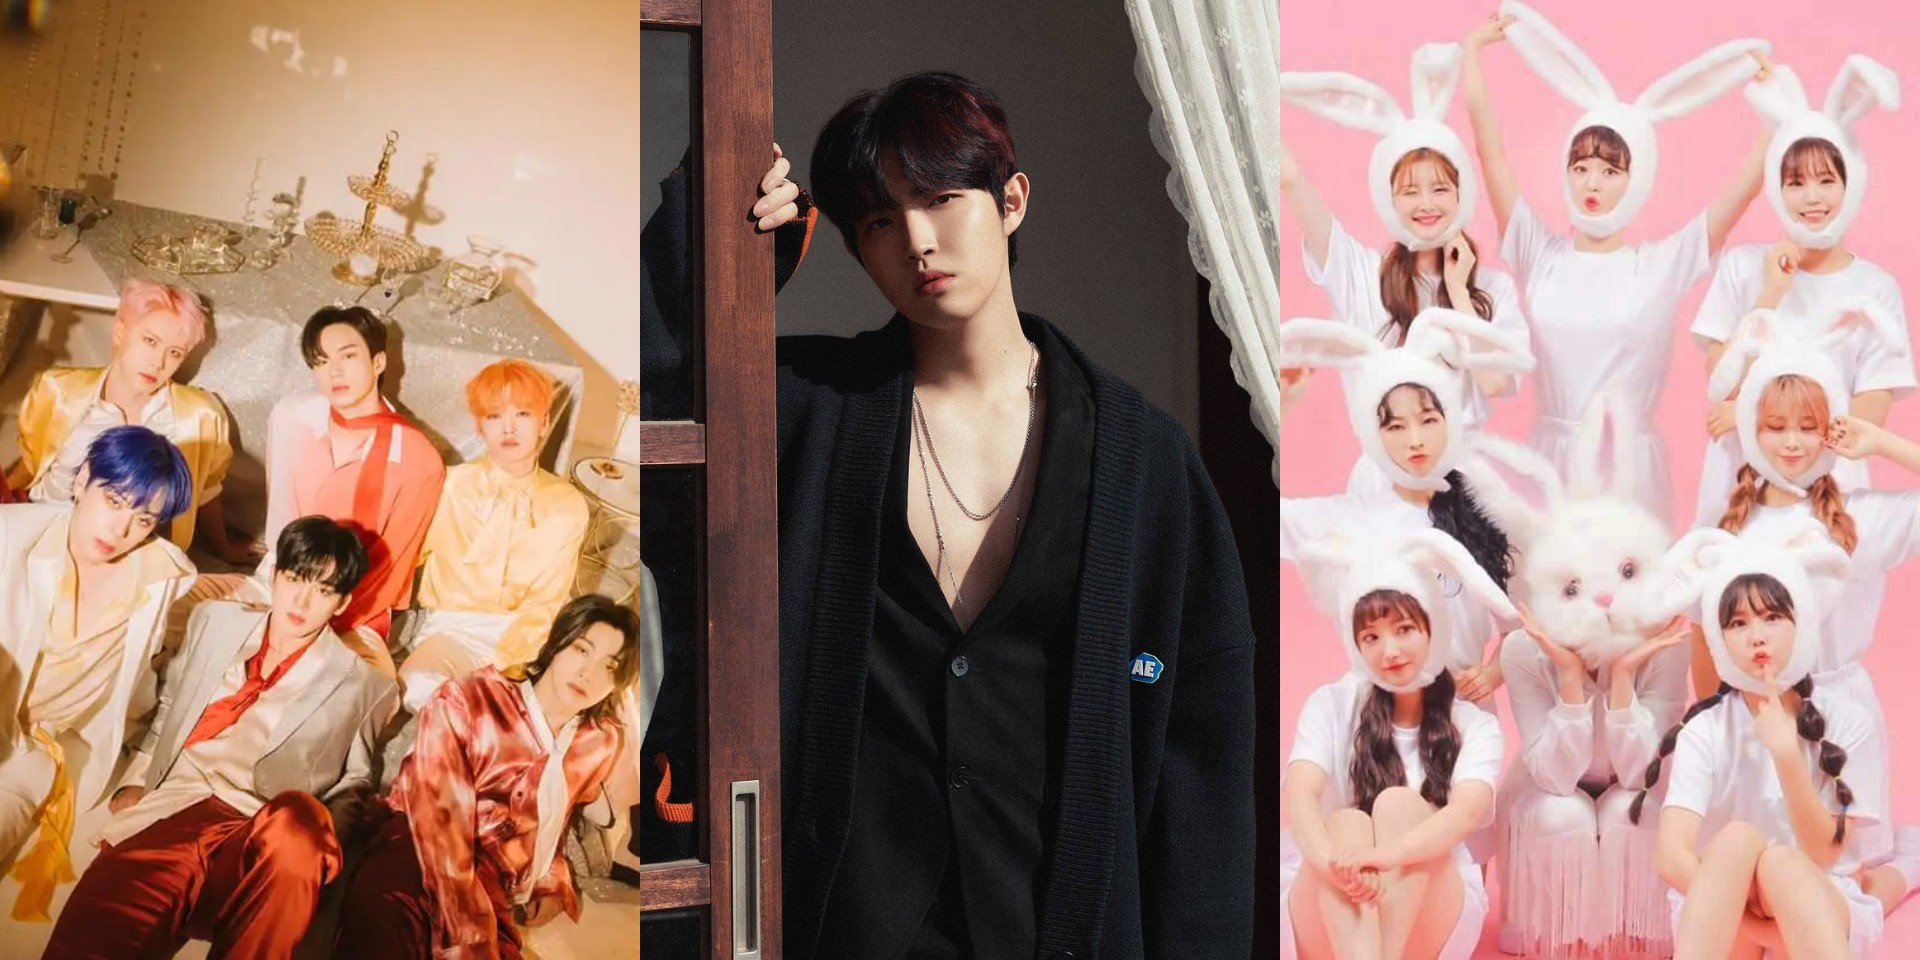 THE SHOW launches "Fanbox NFTs" featuring WEi, Kim Jaehwan, Woo!ah!, and more 